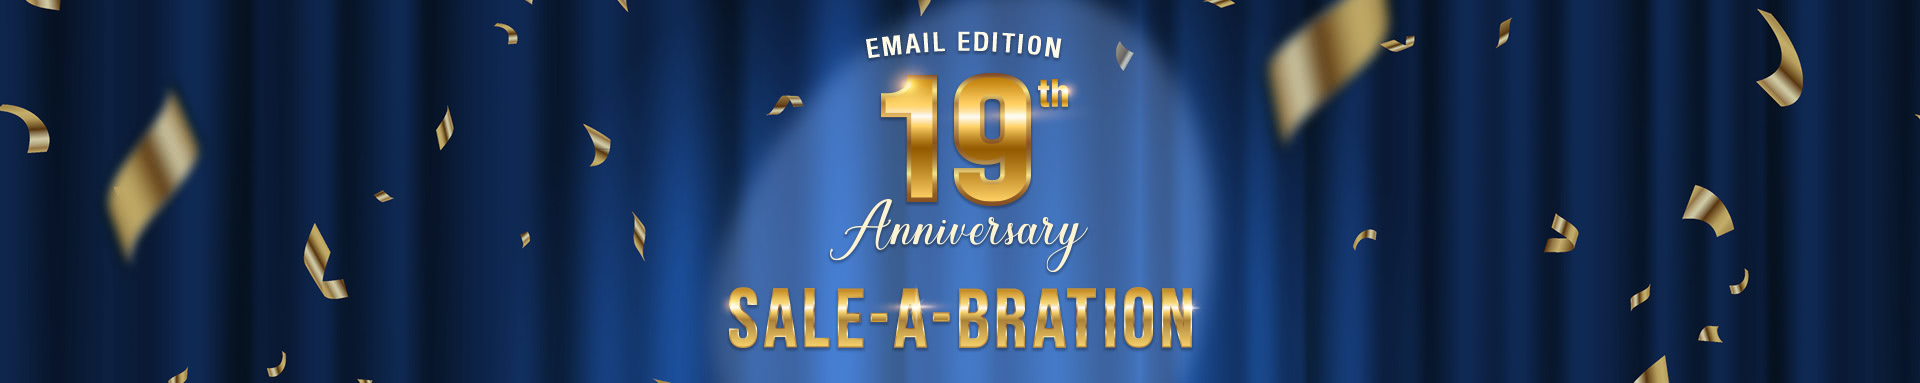 Email Edition 19th Anniversary SALE-A-BRATION